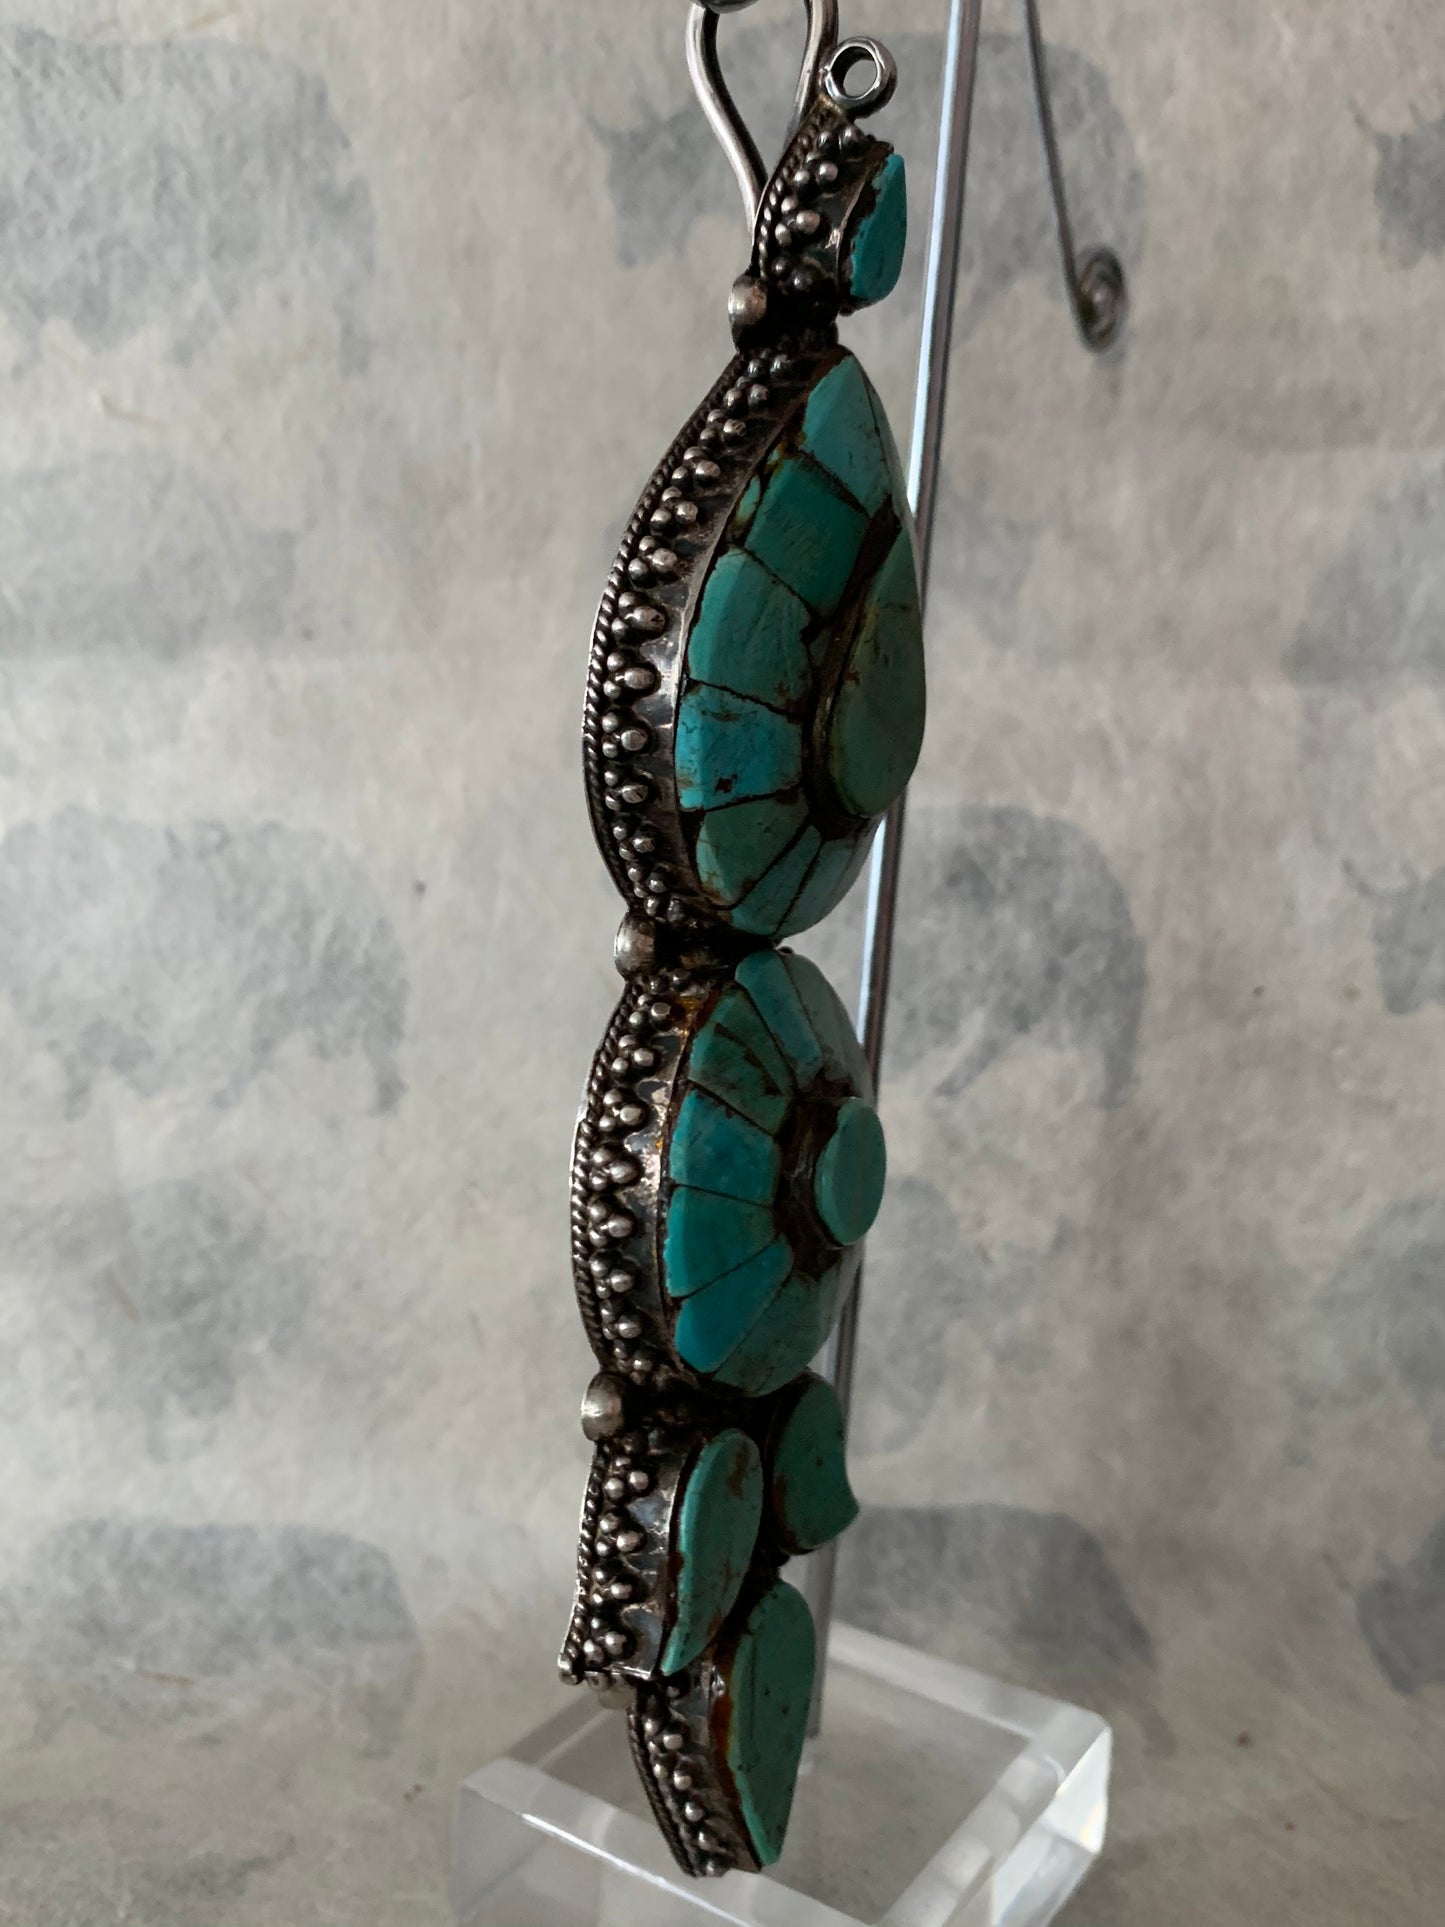 A single antique Tibetan turquoise and silver ear pendant/ earring